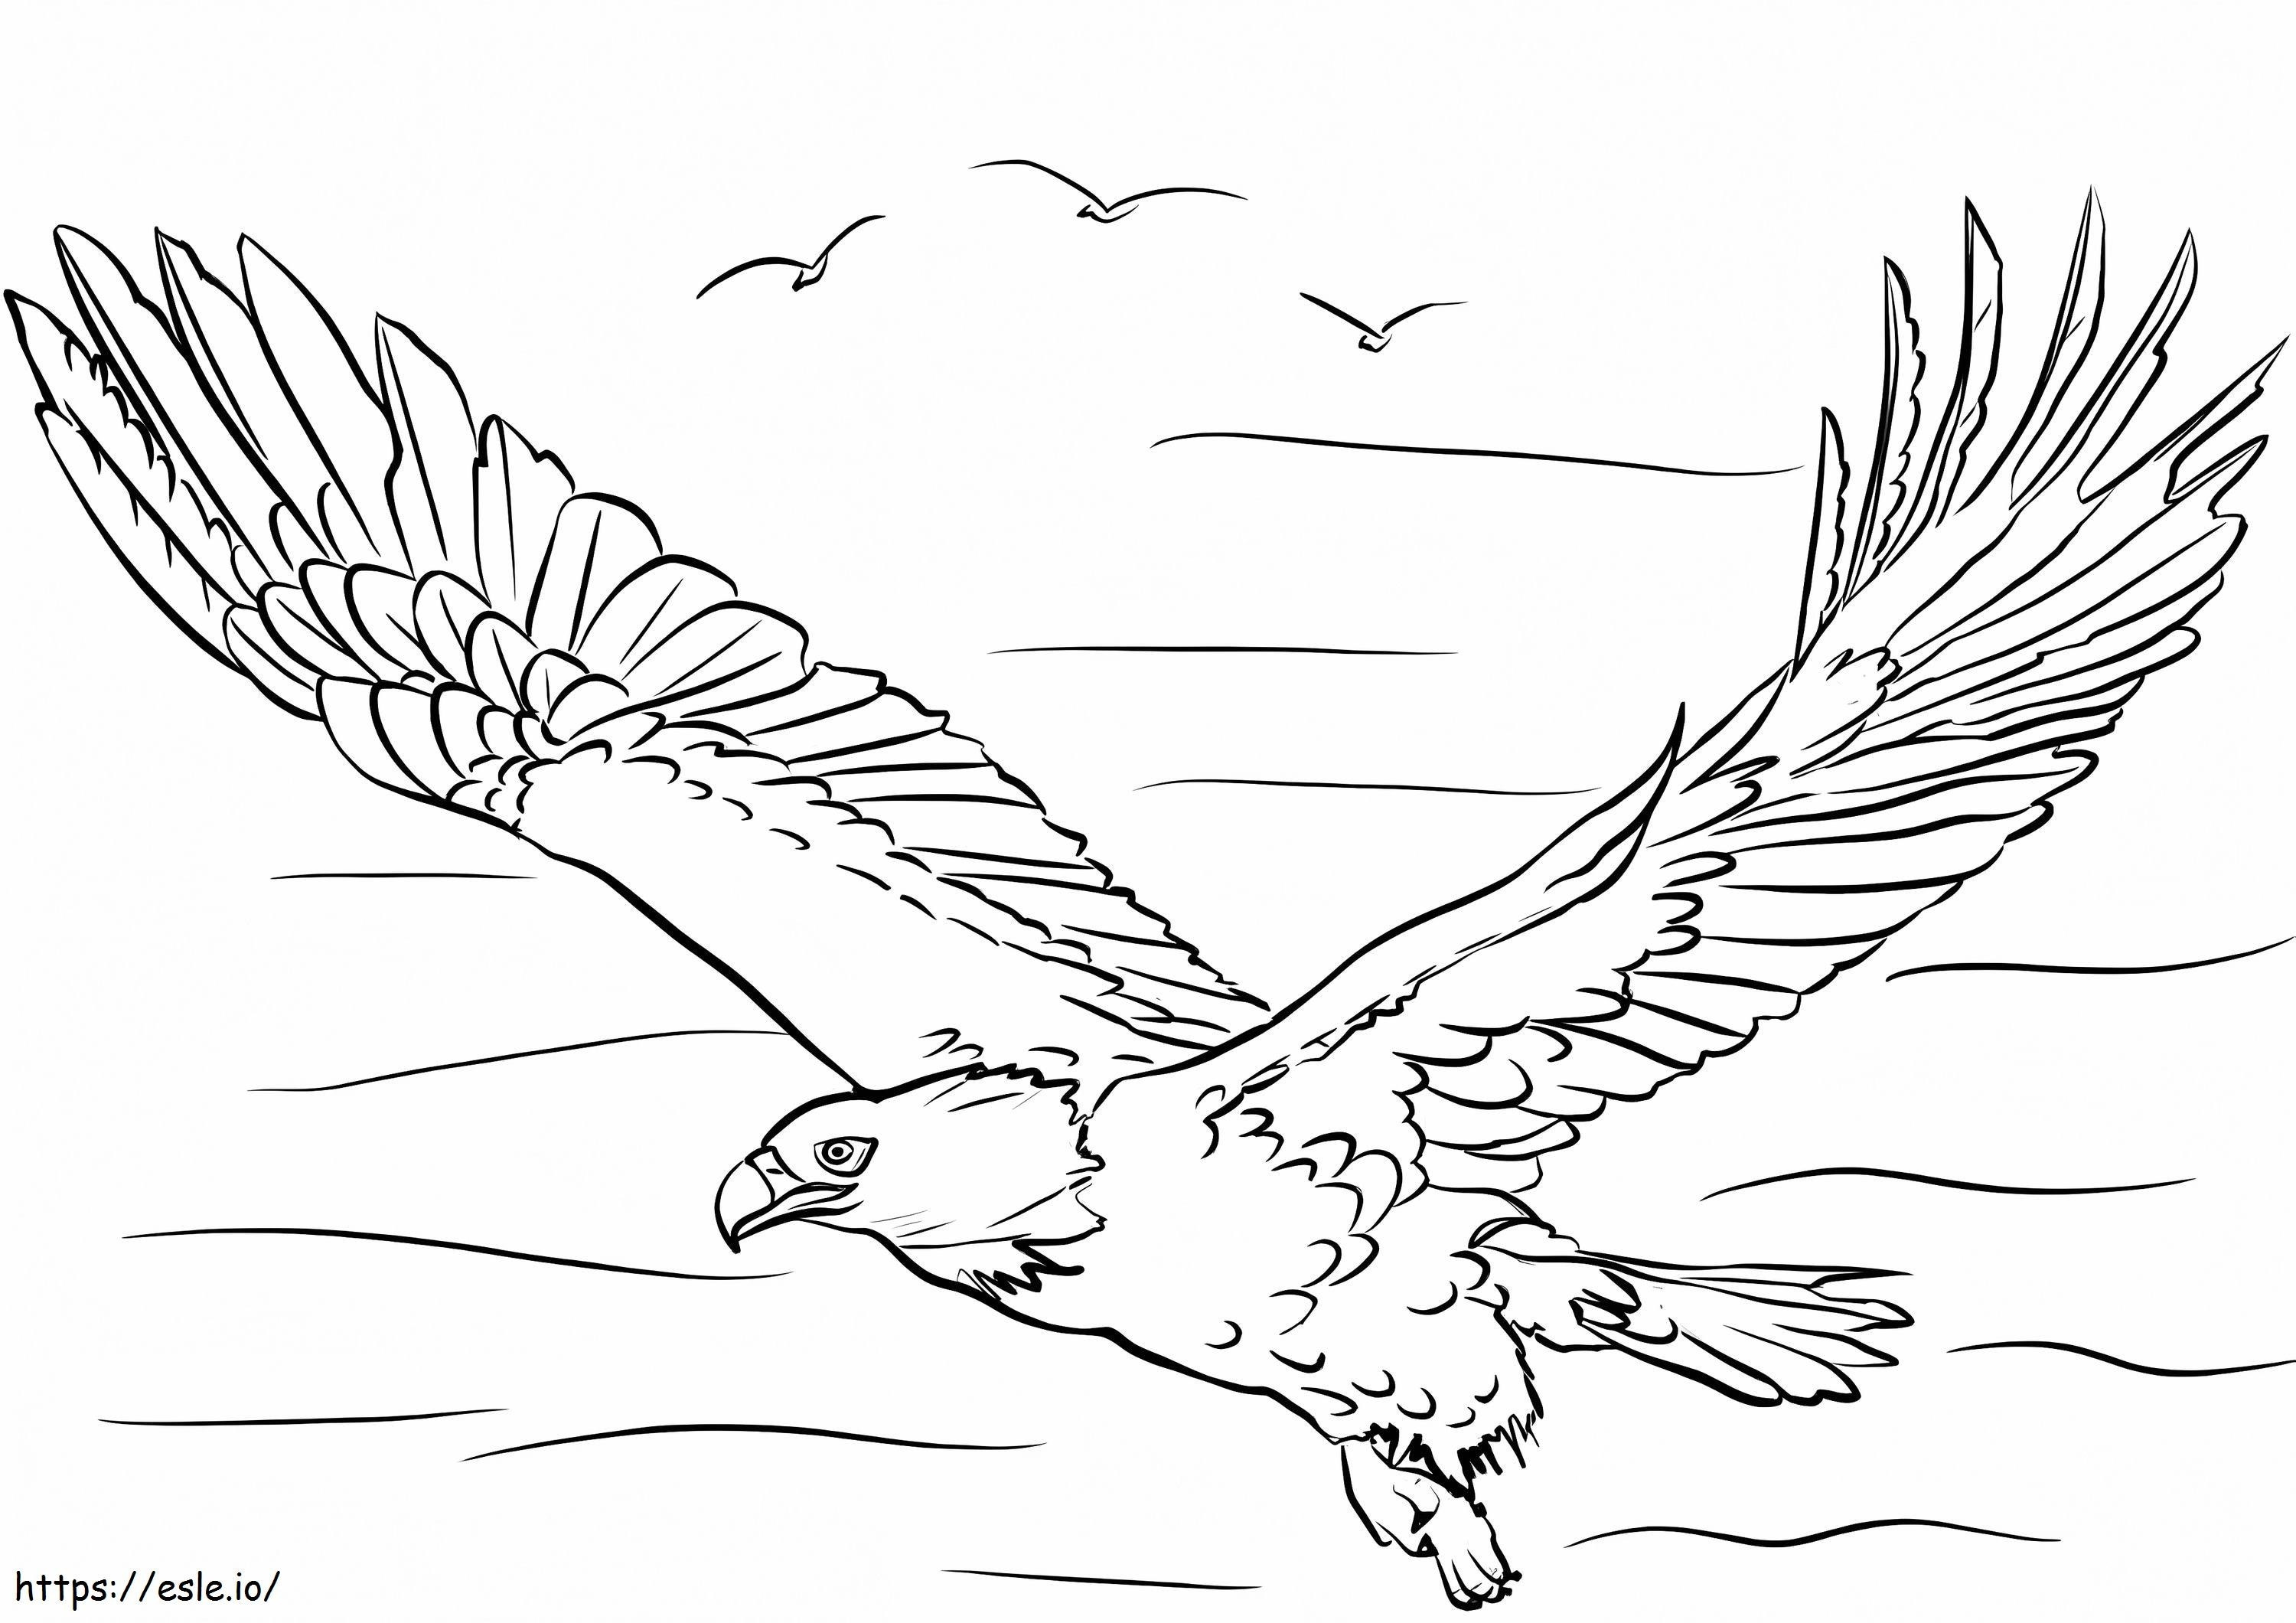 Eagle Flying coloring page